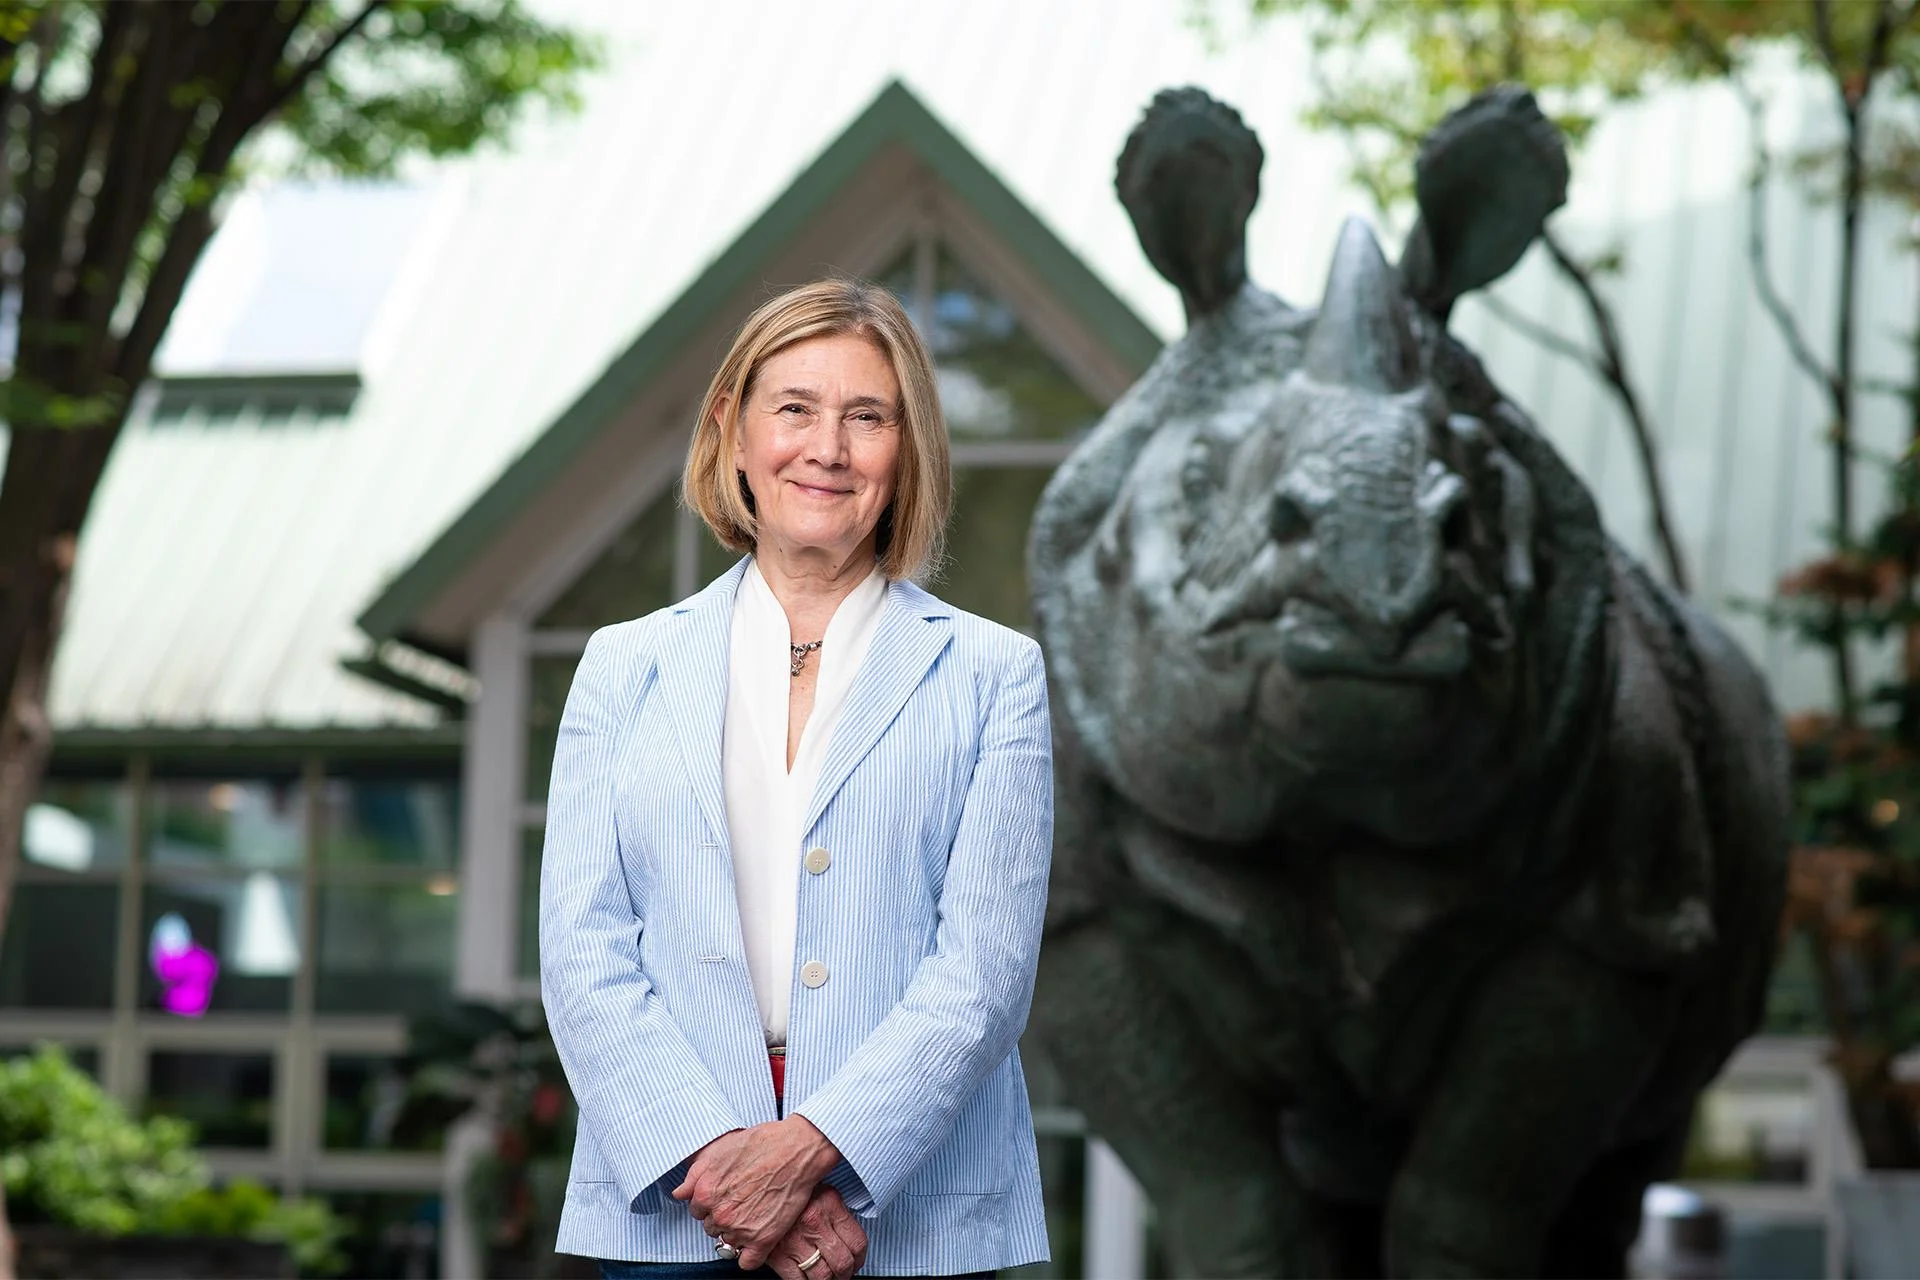 Scheri Fultineer to Become New Dean of SMFA at Tufts